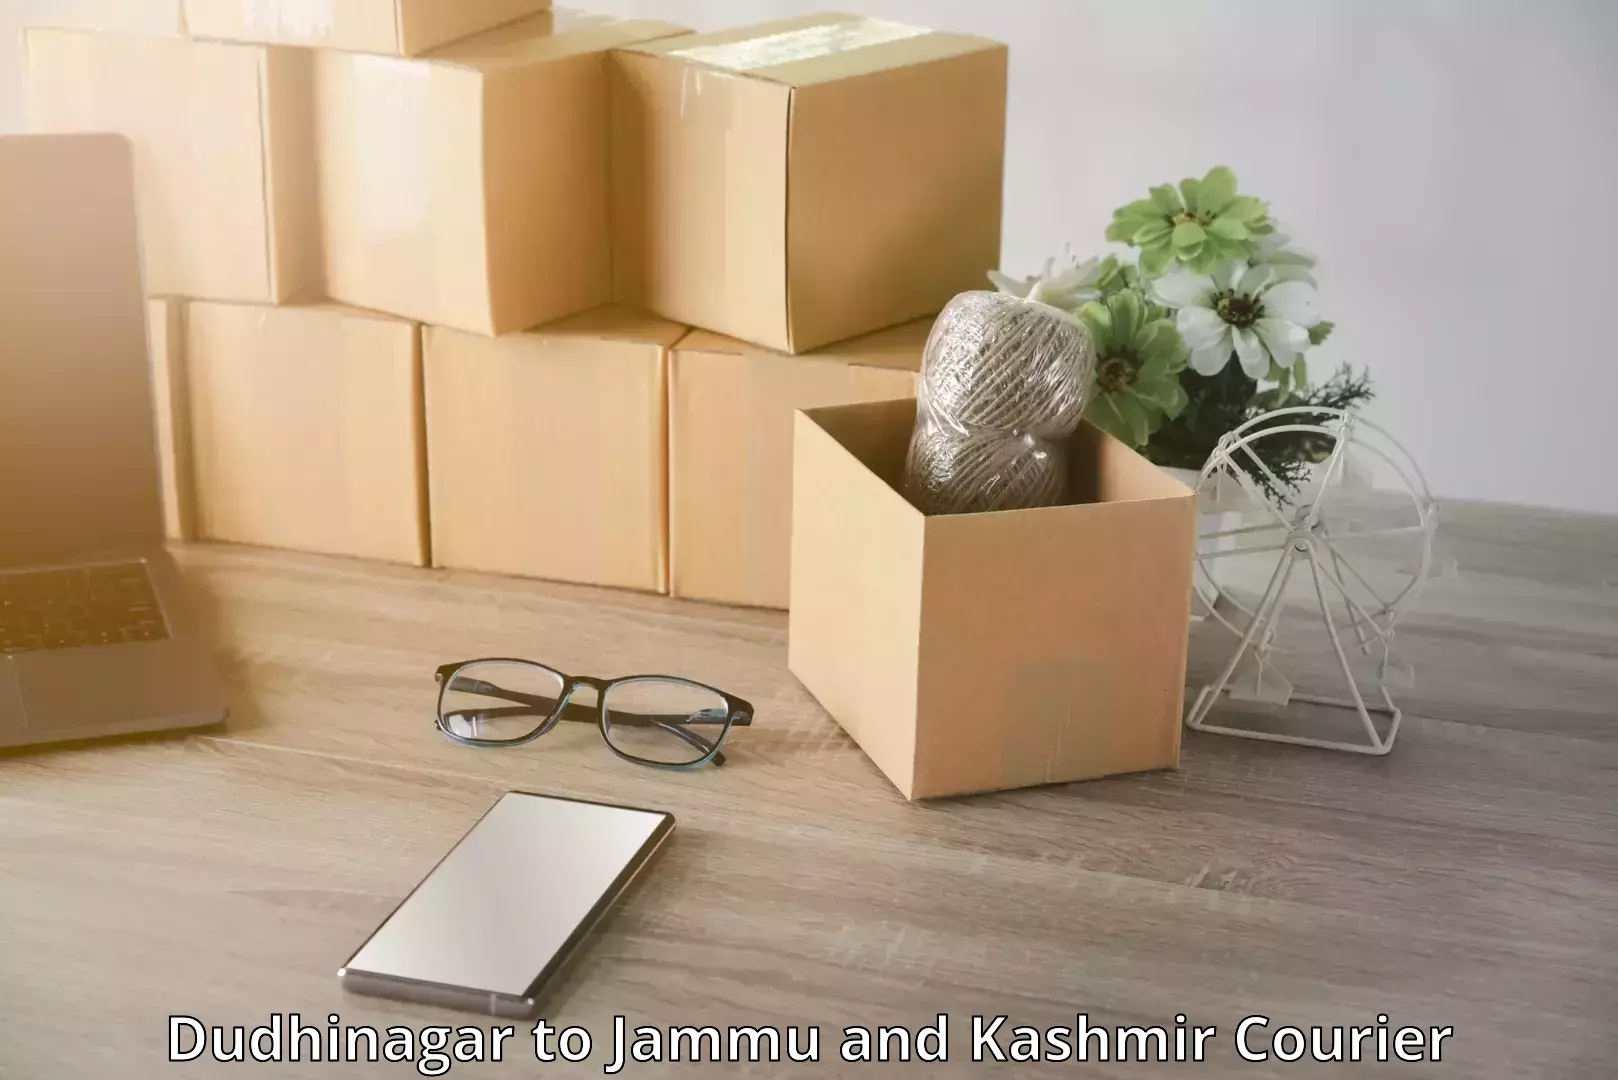 Express luggage delivery Dudhinagar to Jammu and Kashmir